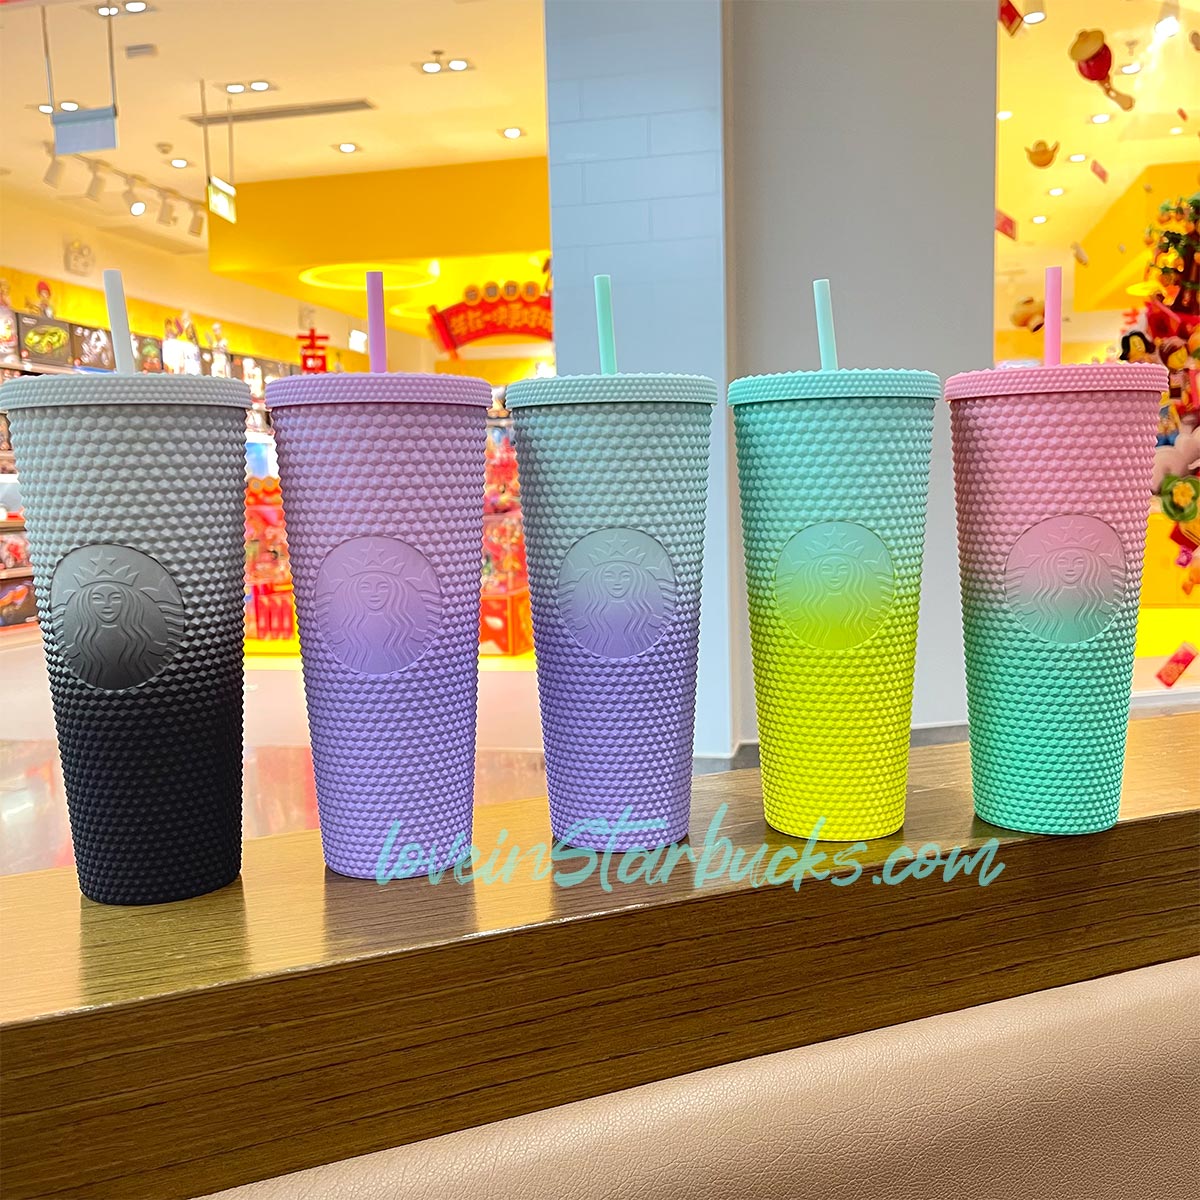 Starbucks Taiwan ombre matte purple pink gradient studded cold tumbler